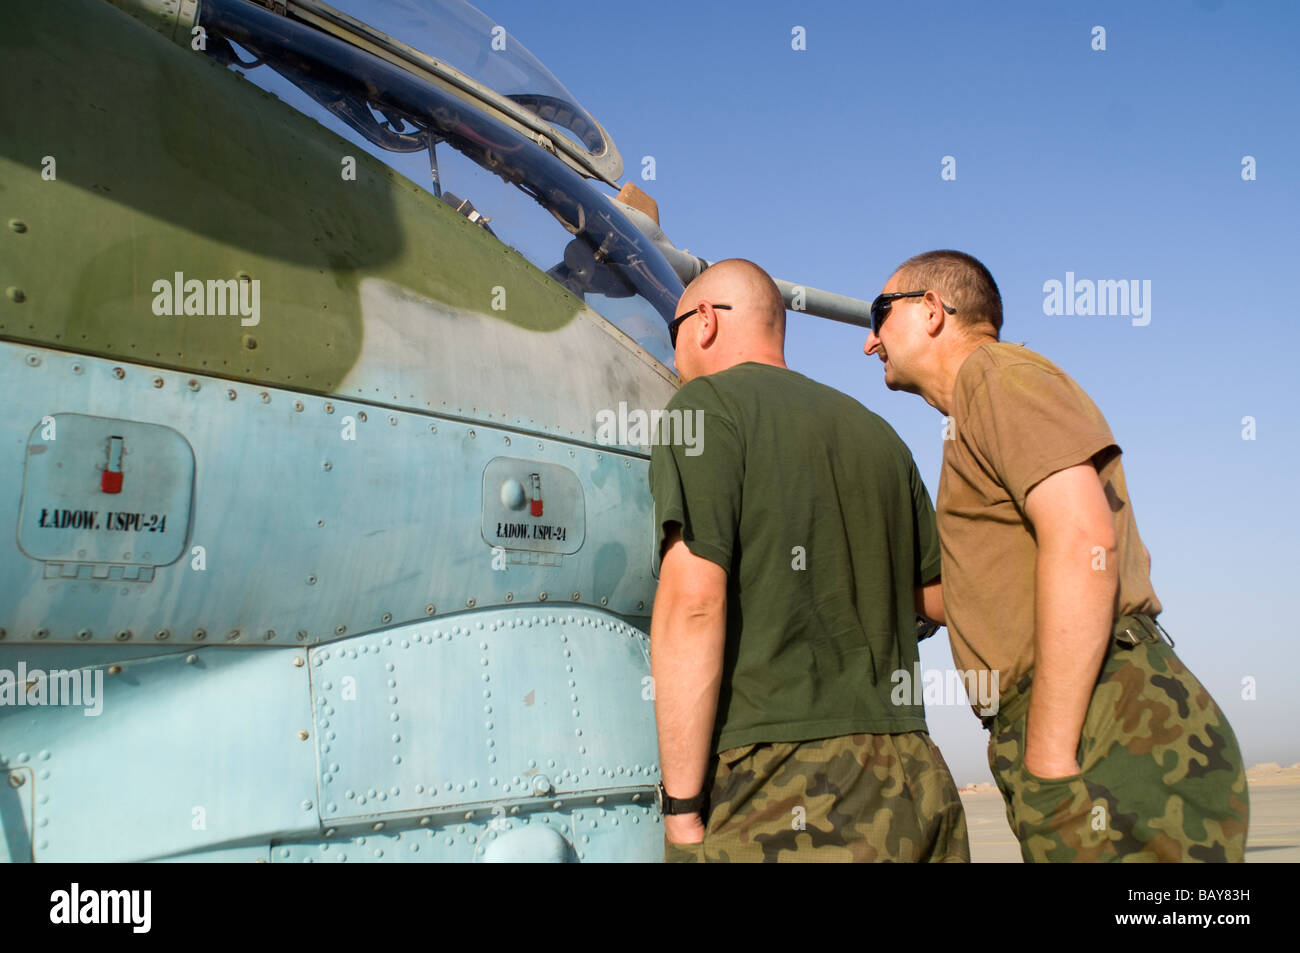 Polish military crews servicing and flying Mi-24 HIND-D helicopters in Iraq's Wasit province. Stock Photo